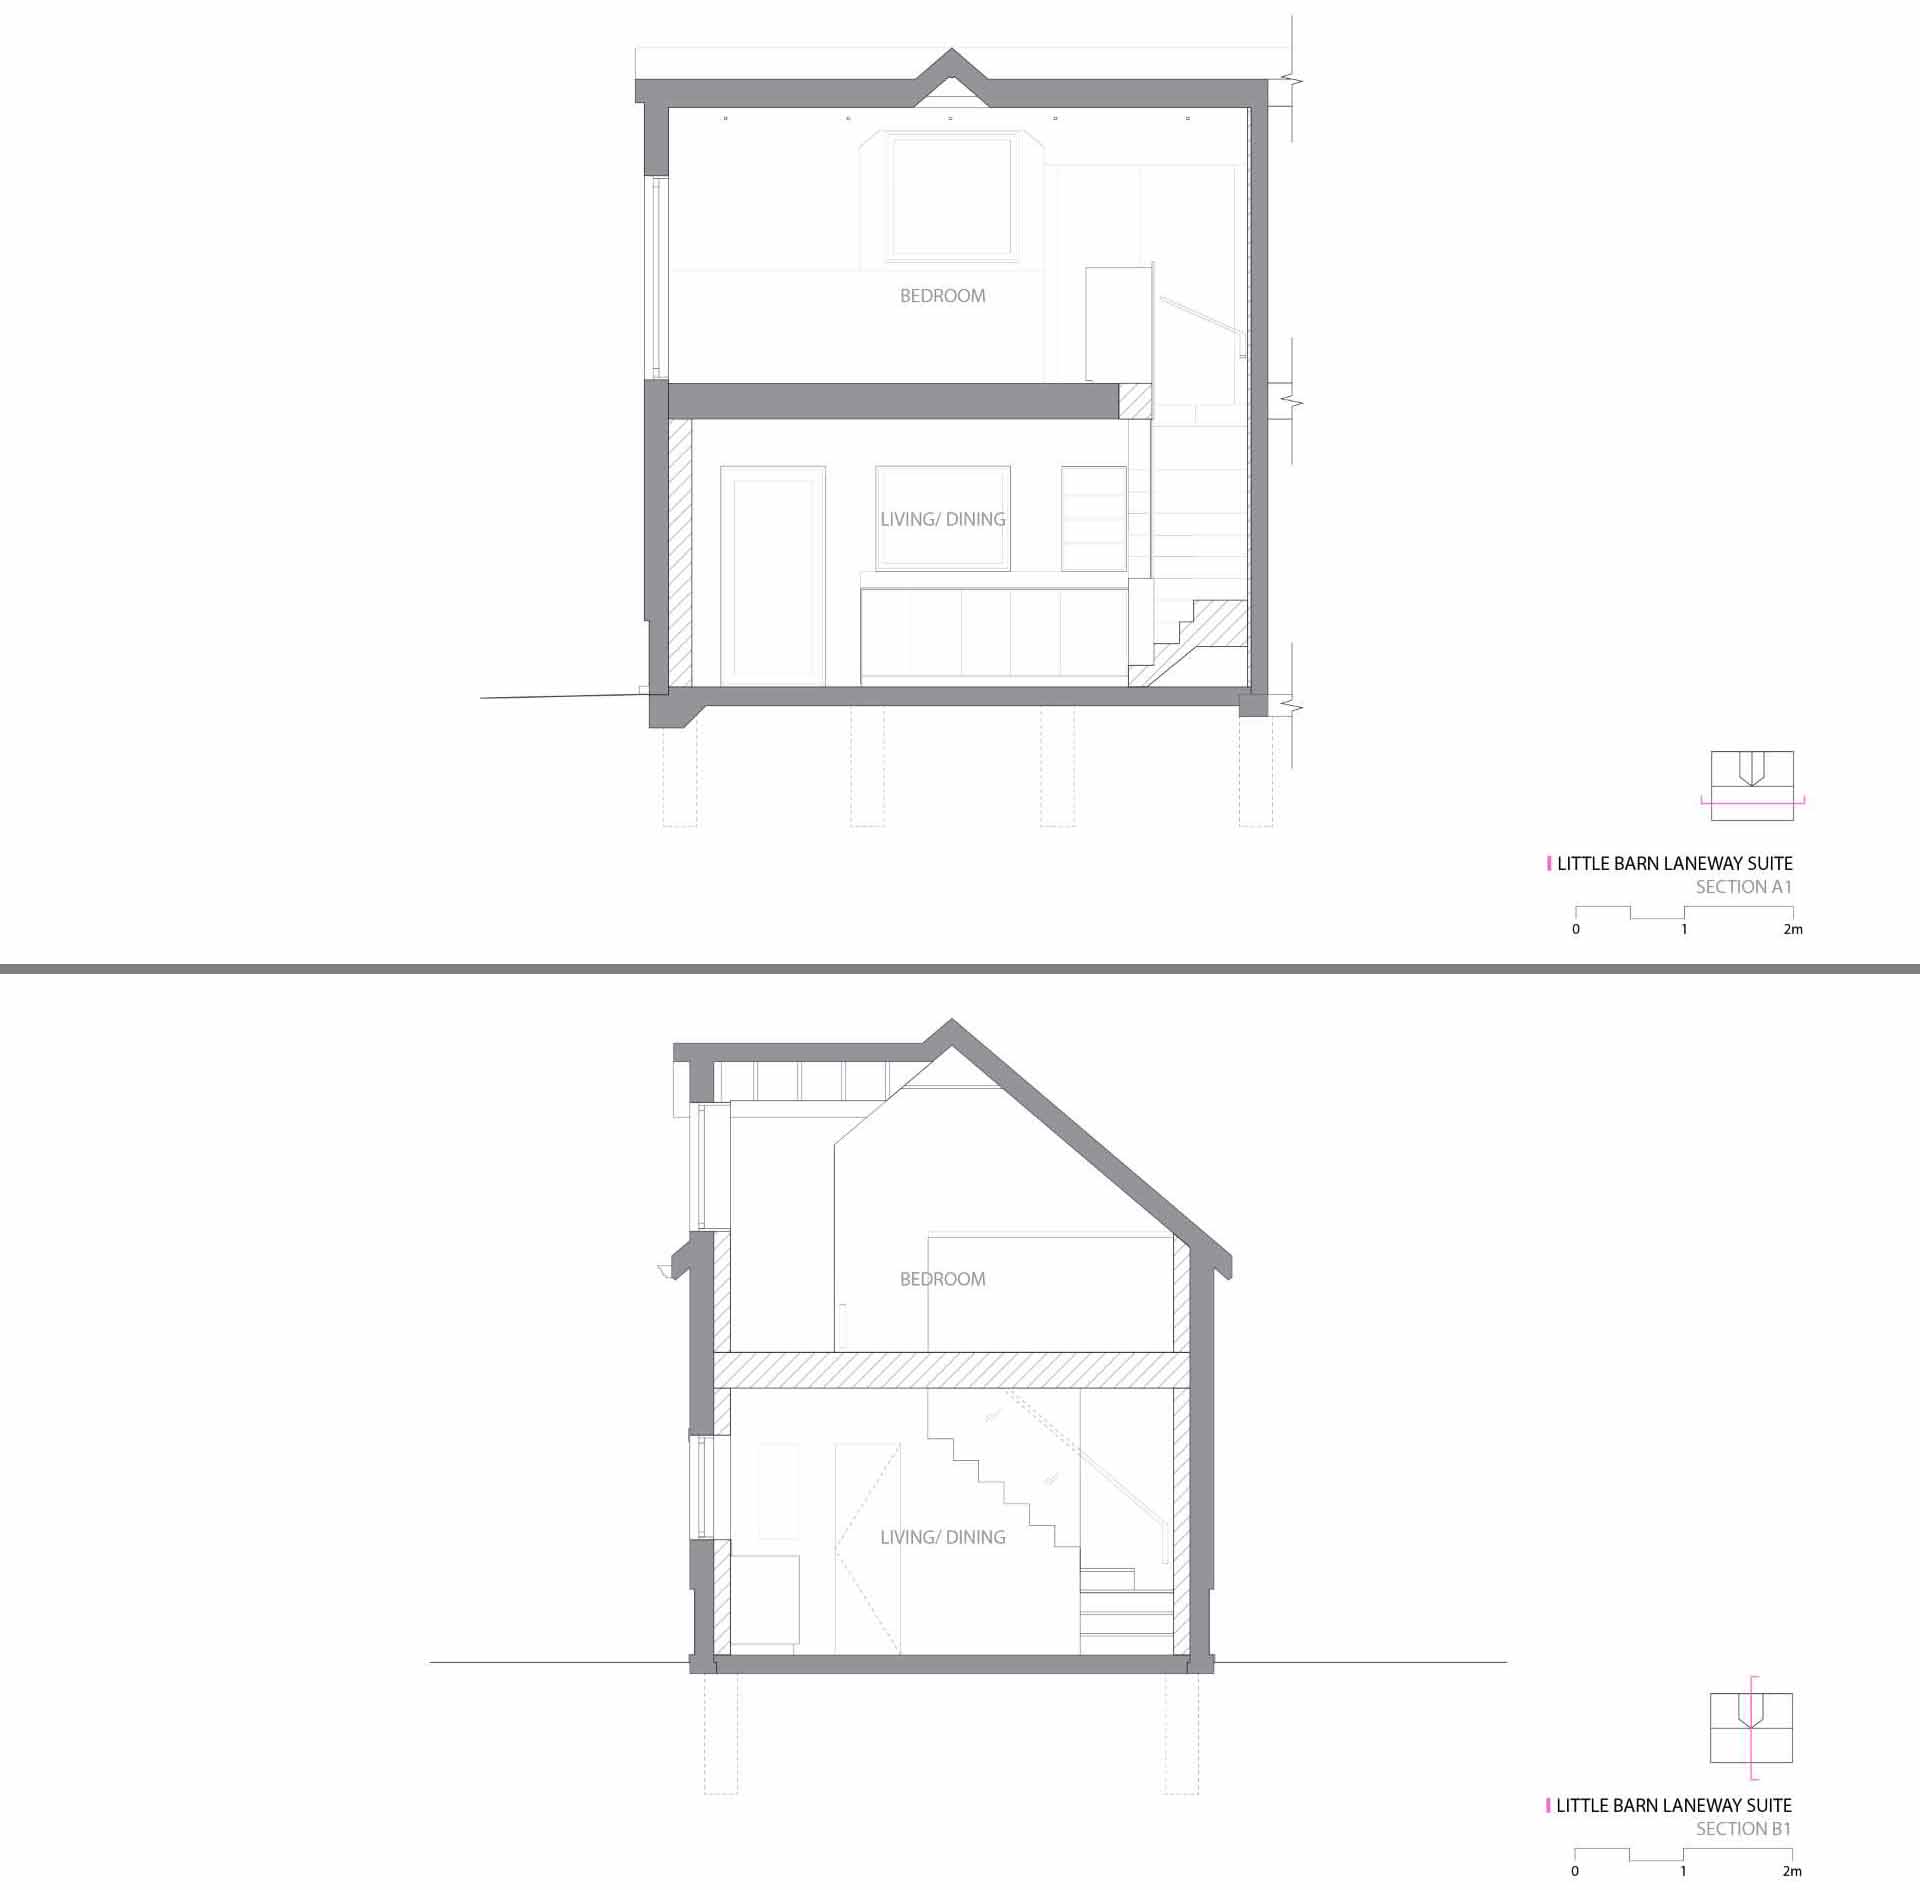 Architectural drawings for a small laneway house.